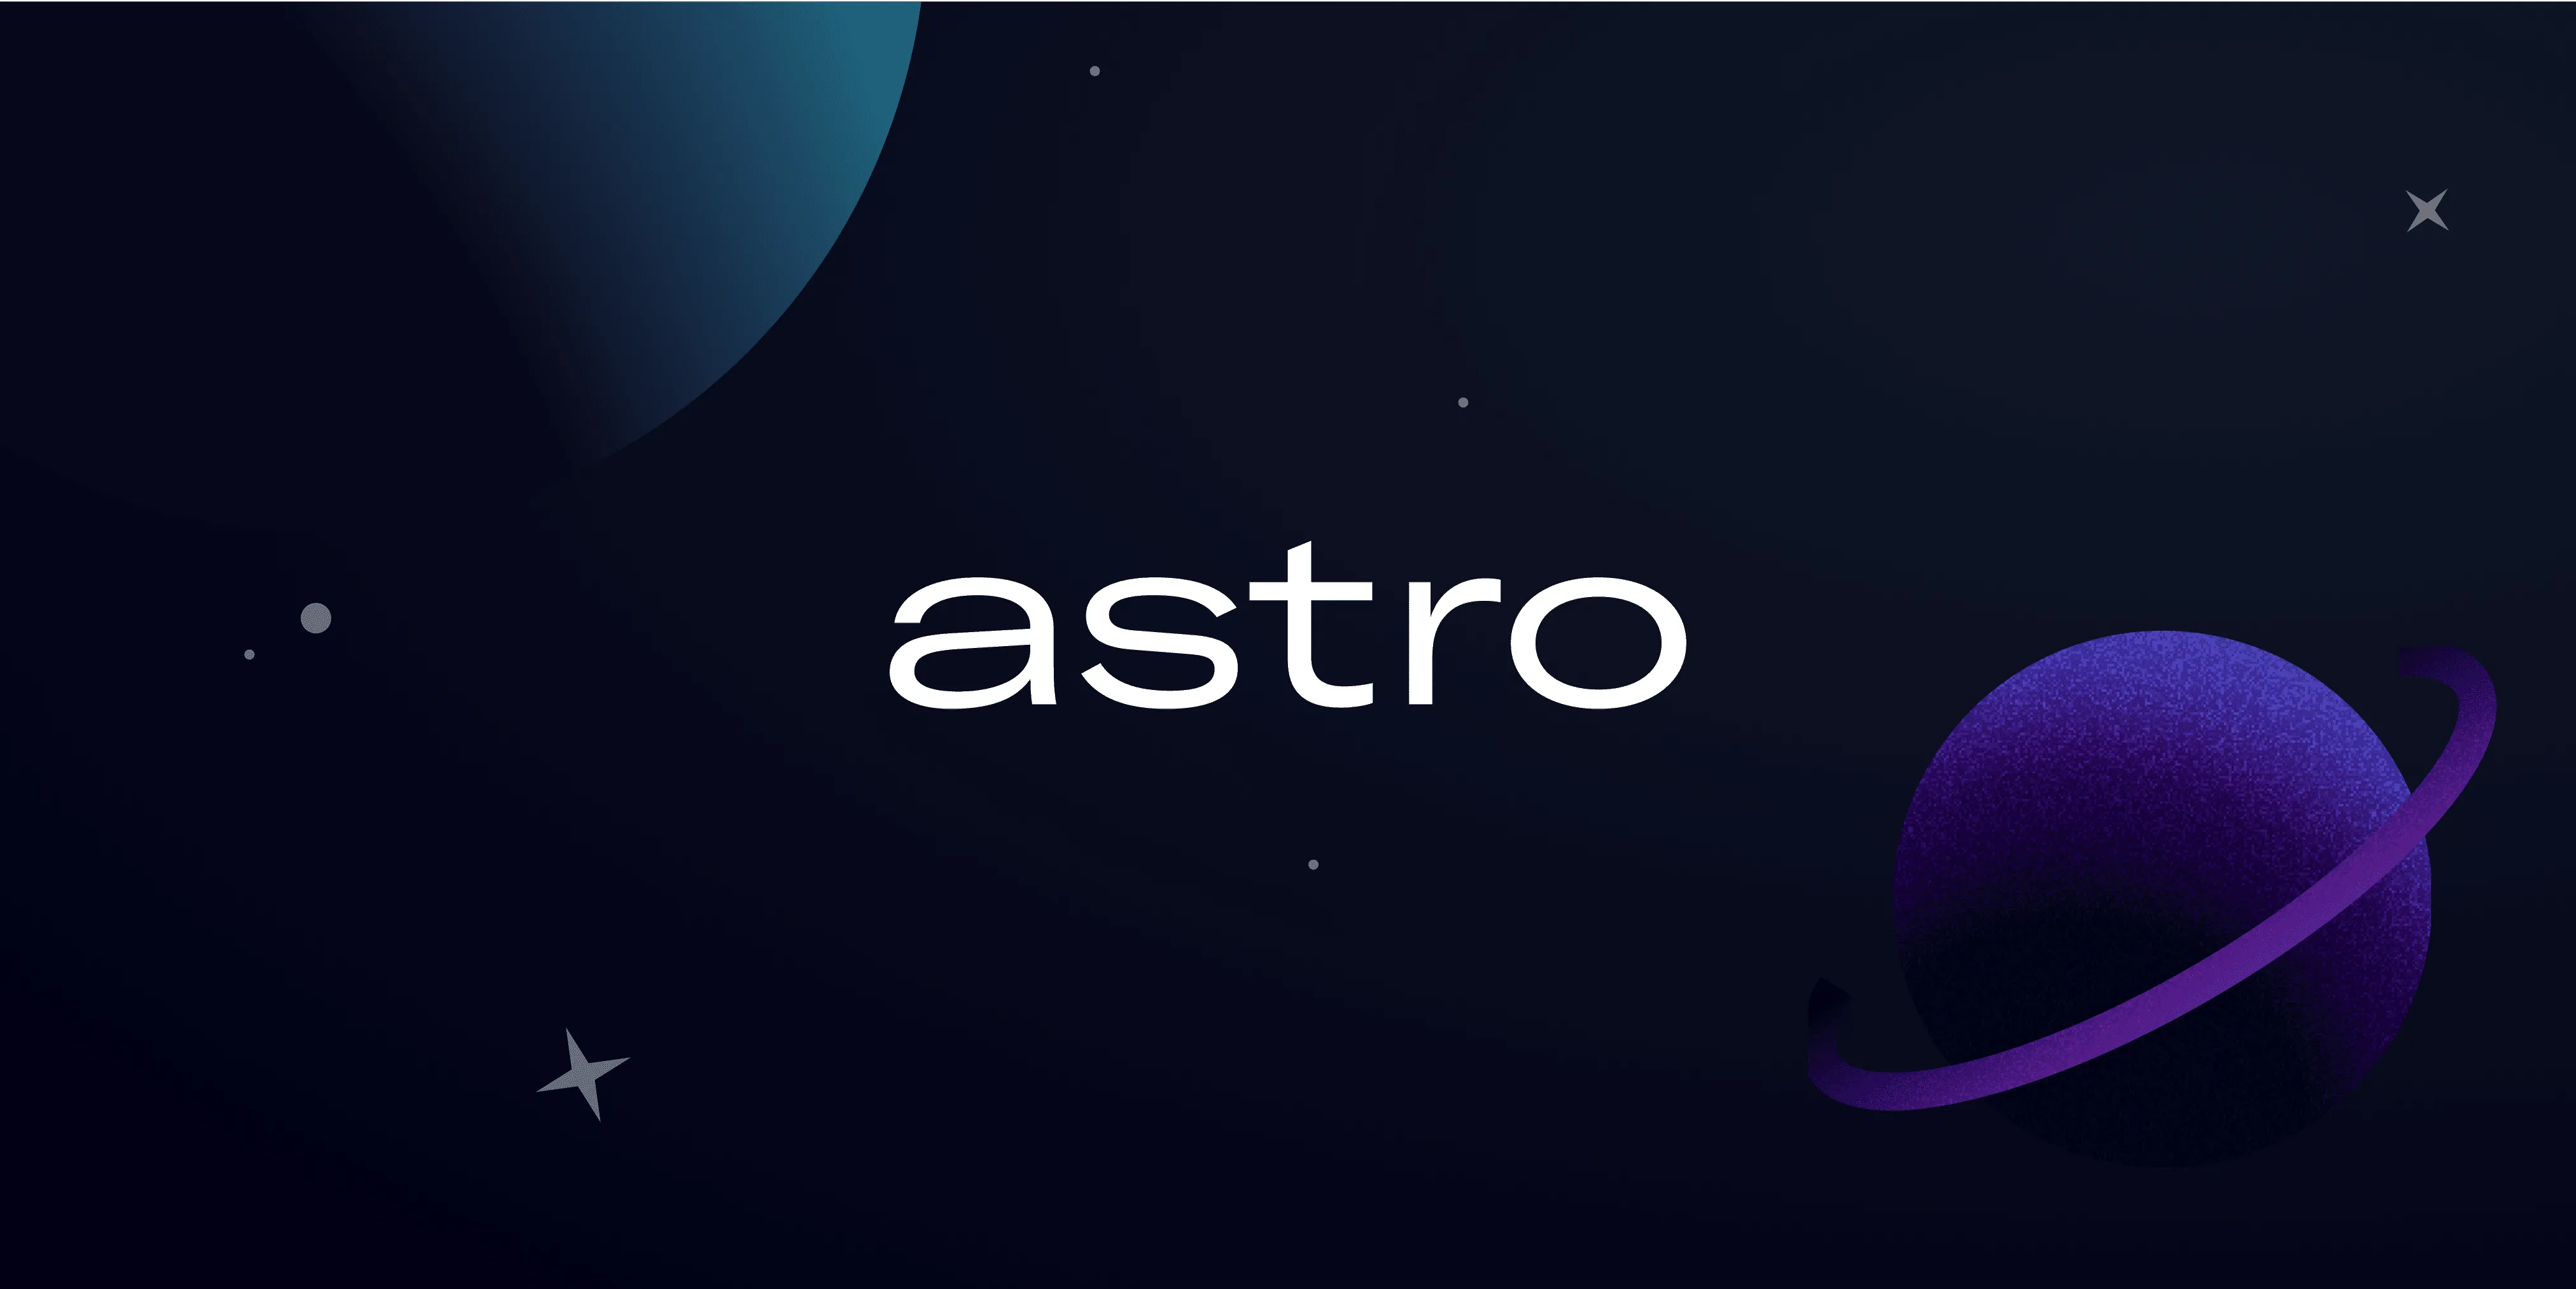 Moving to Astro